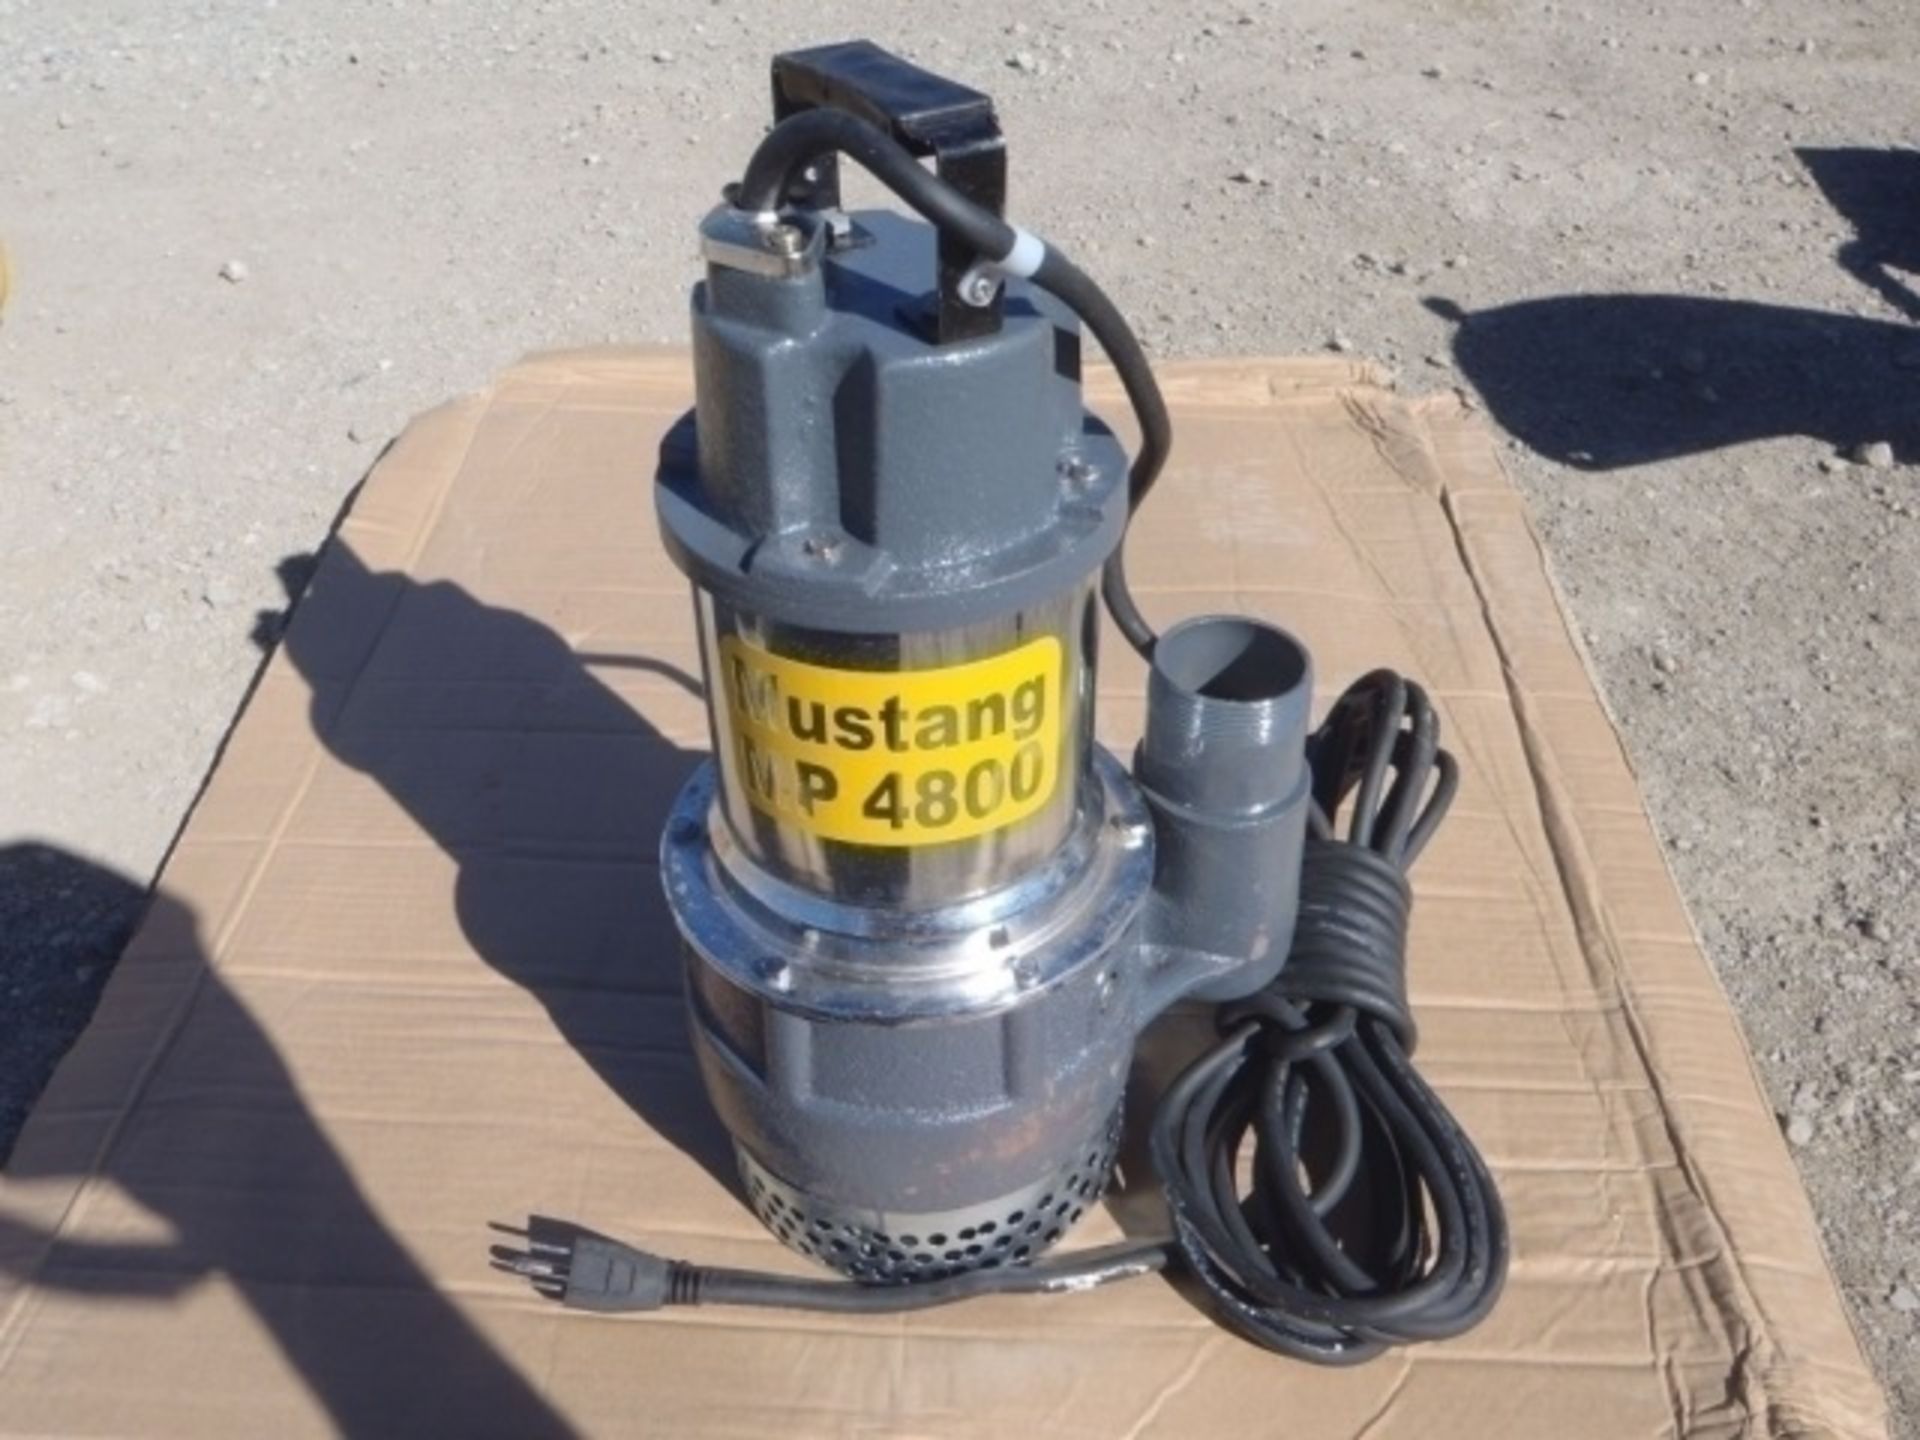 Unused Mustang MP4800 2" Submersible Pump, Electric